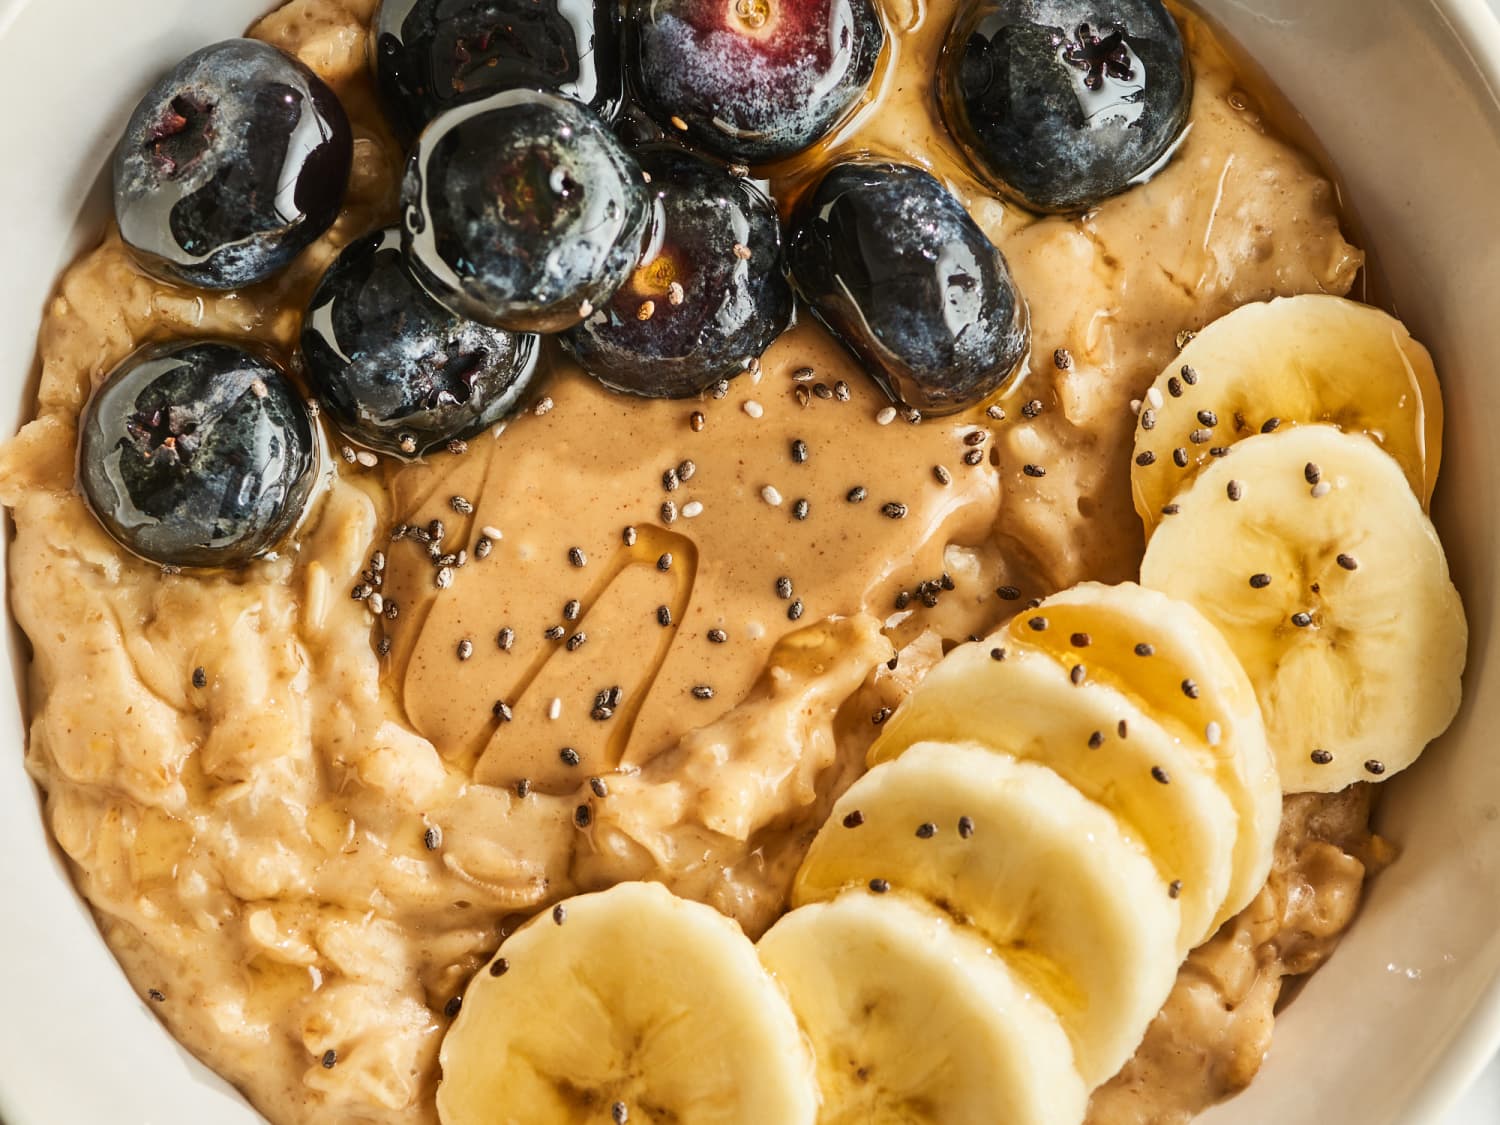 Peanut Butter Oatmeal Recipe (Stovetop or Microwave) | The Kitchn